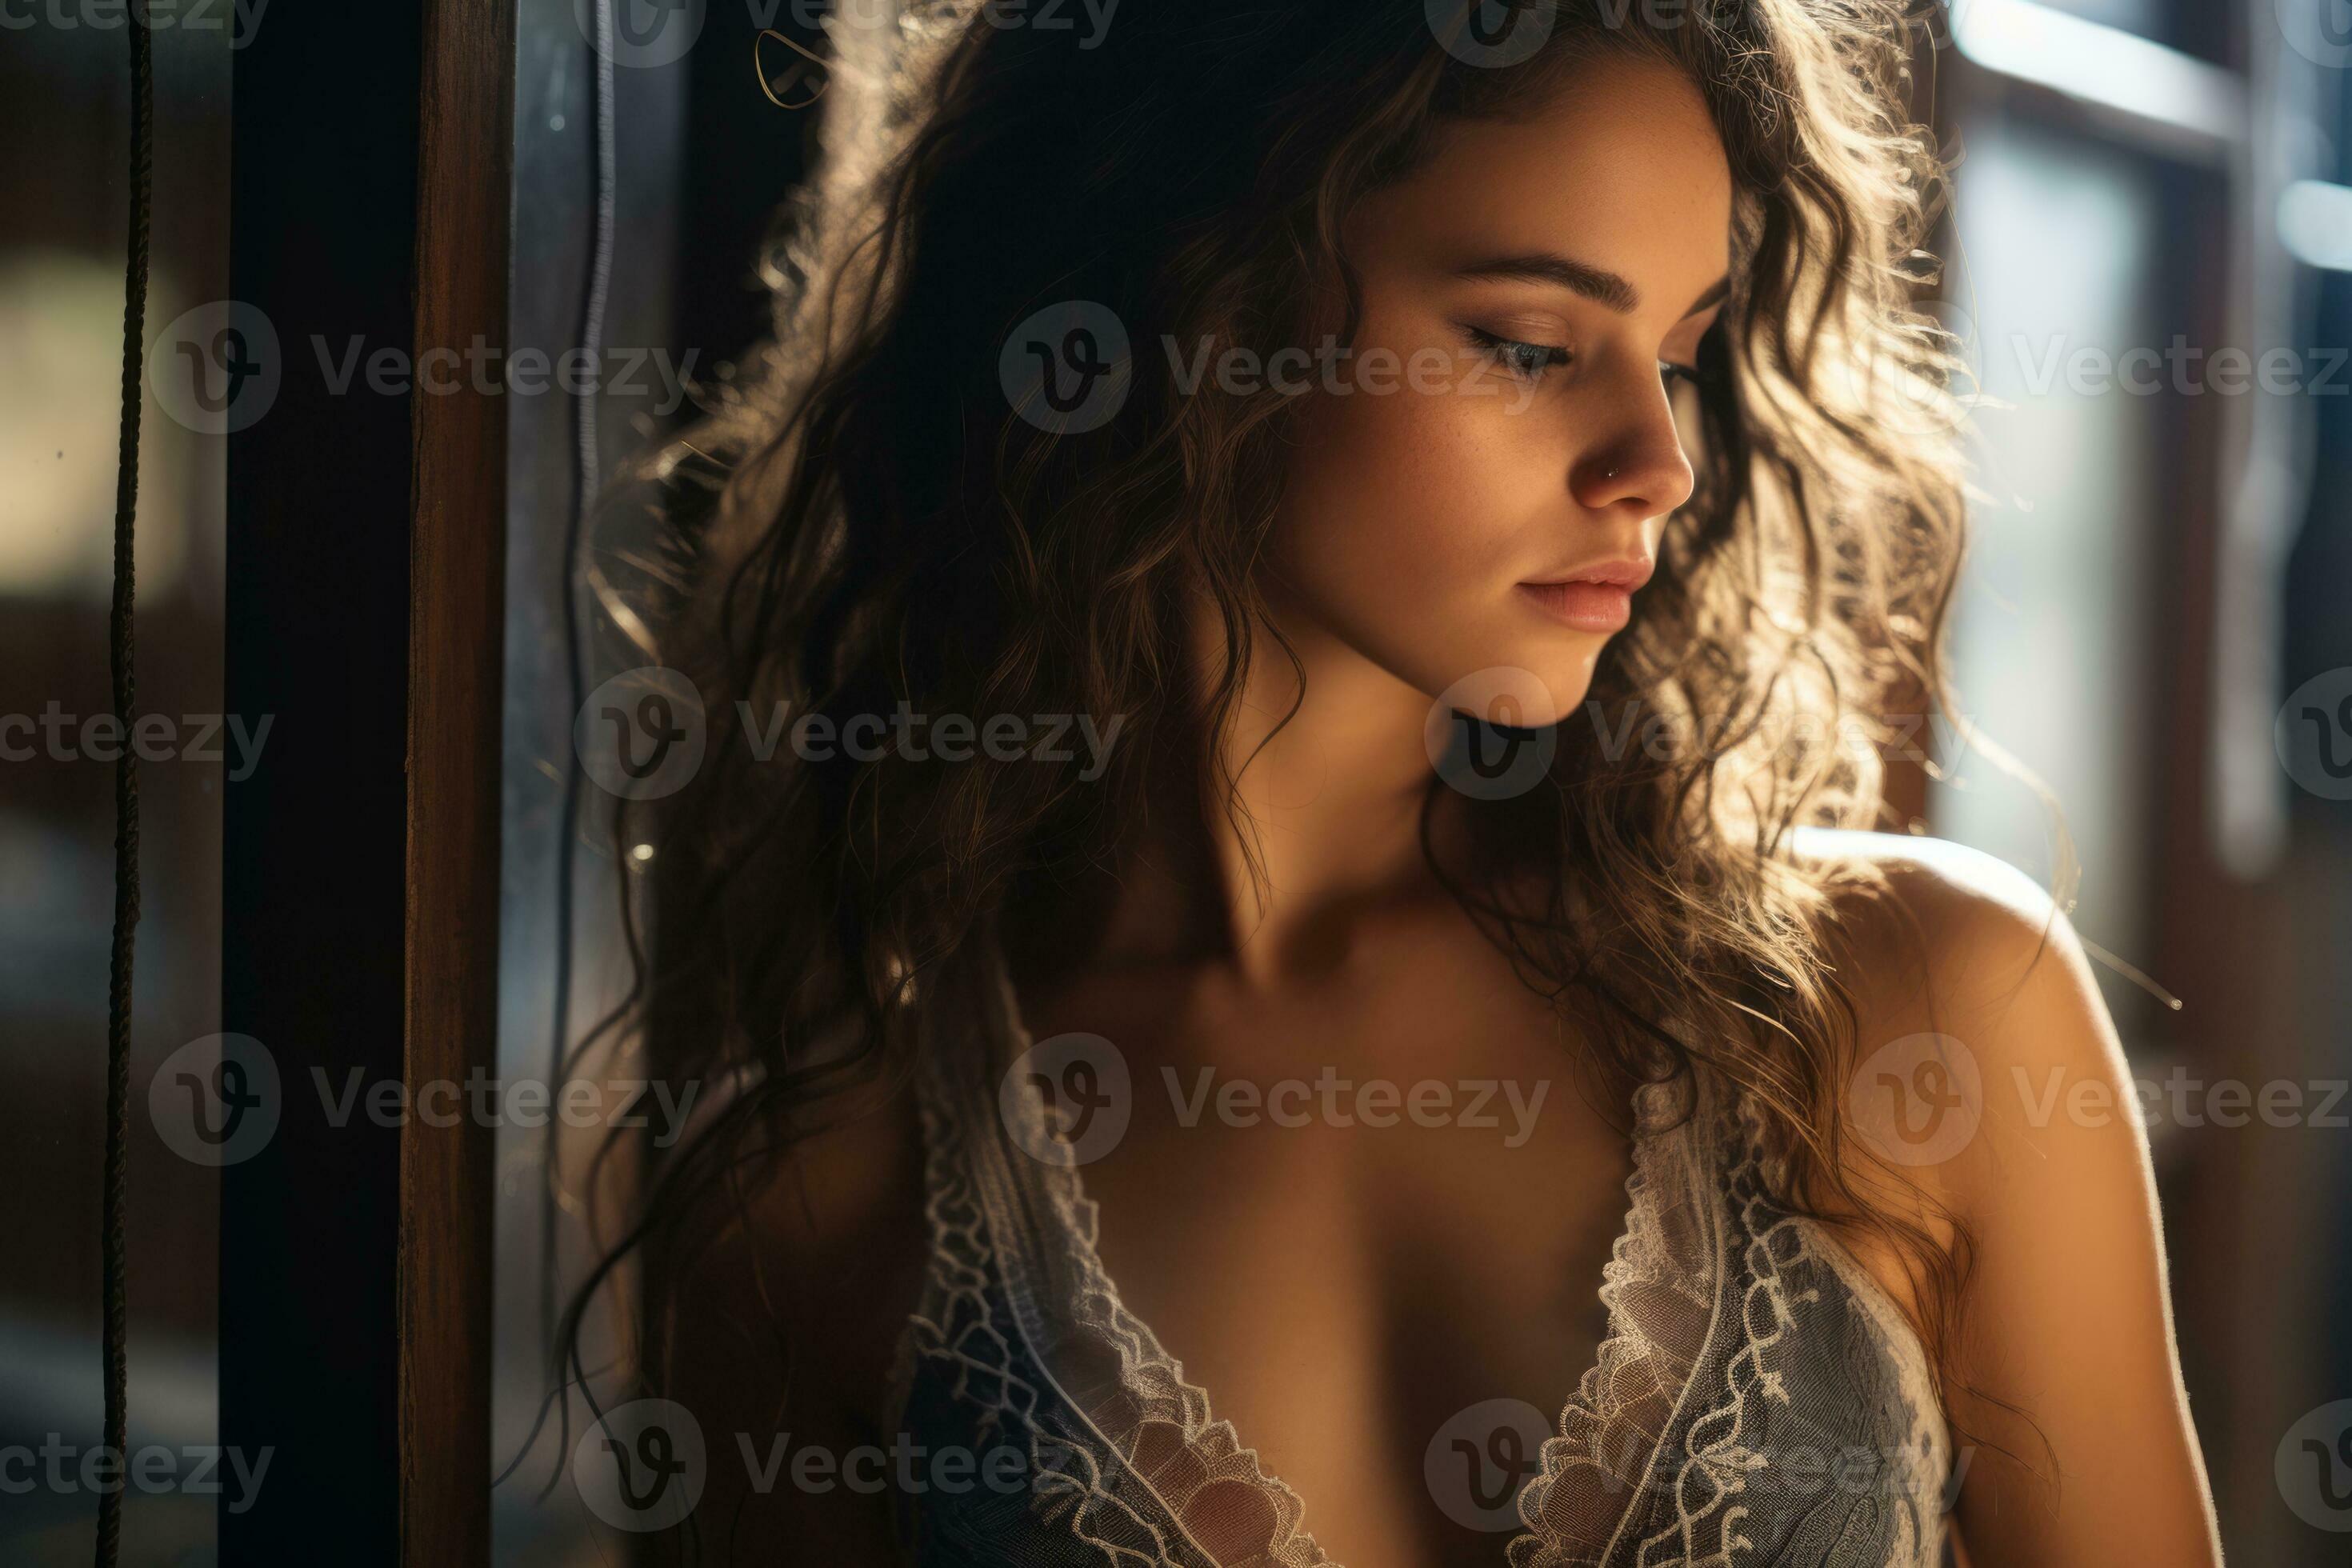 Two young women standing wearing lingerie confident look at camera 11739941  Stock Photo at Vecteezy